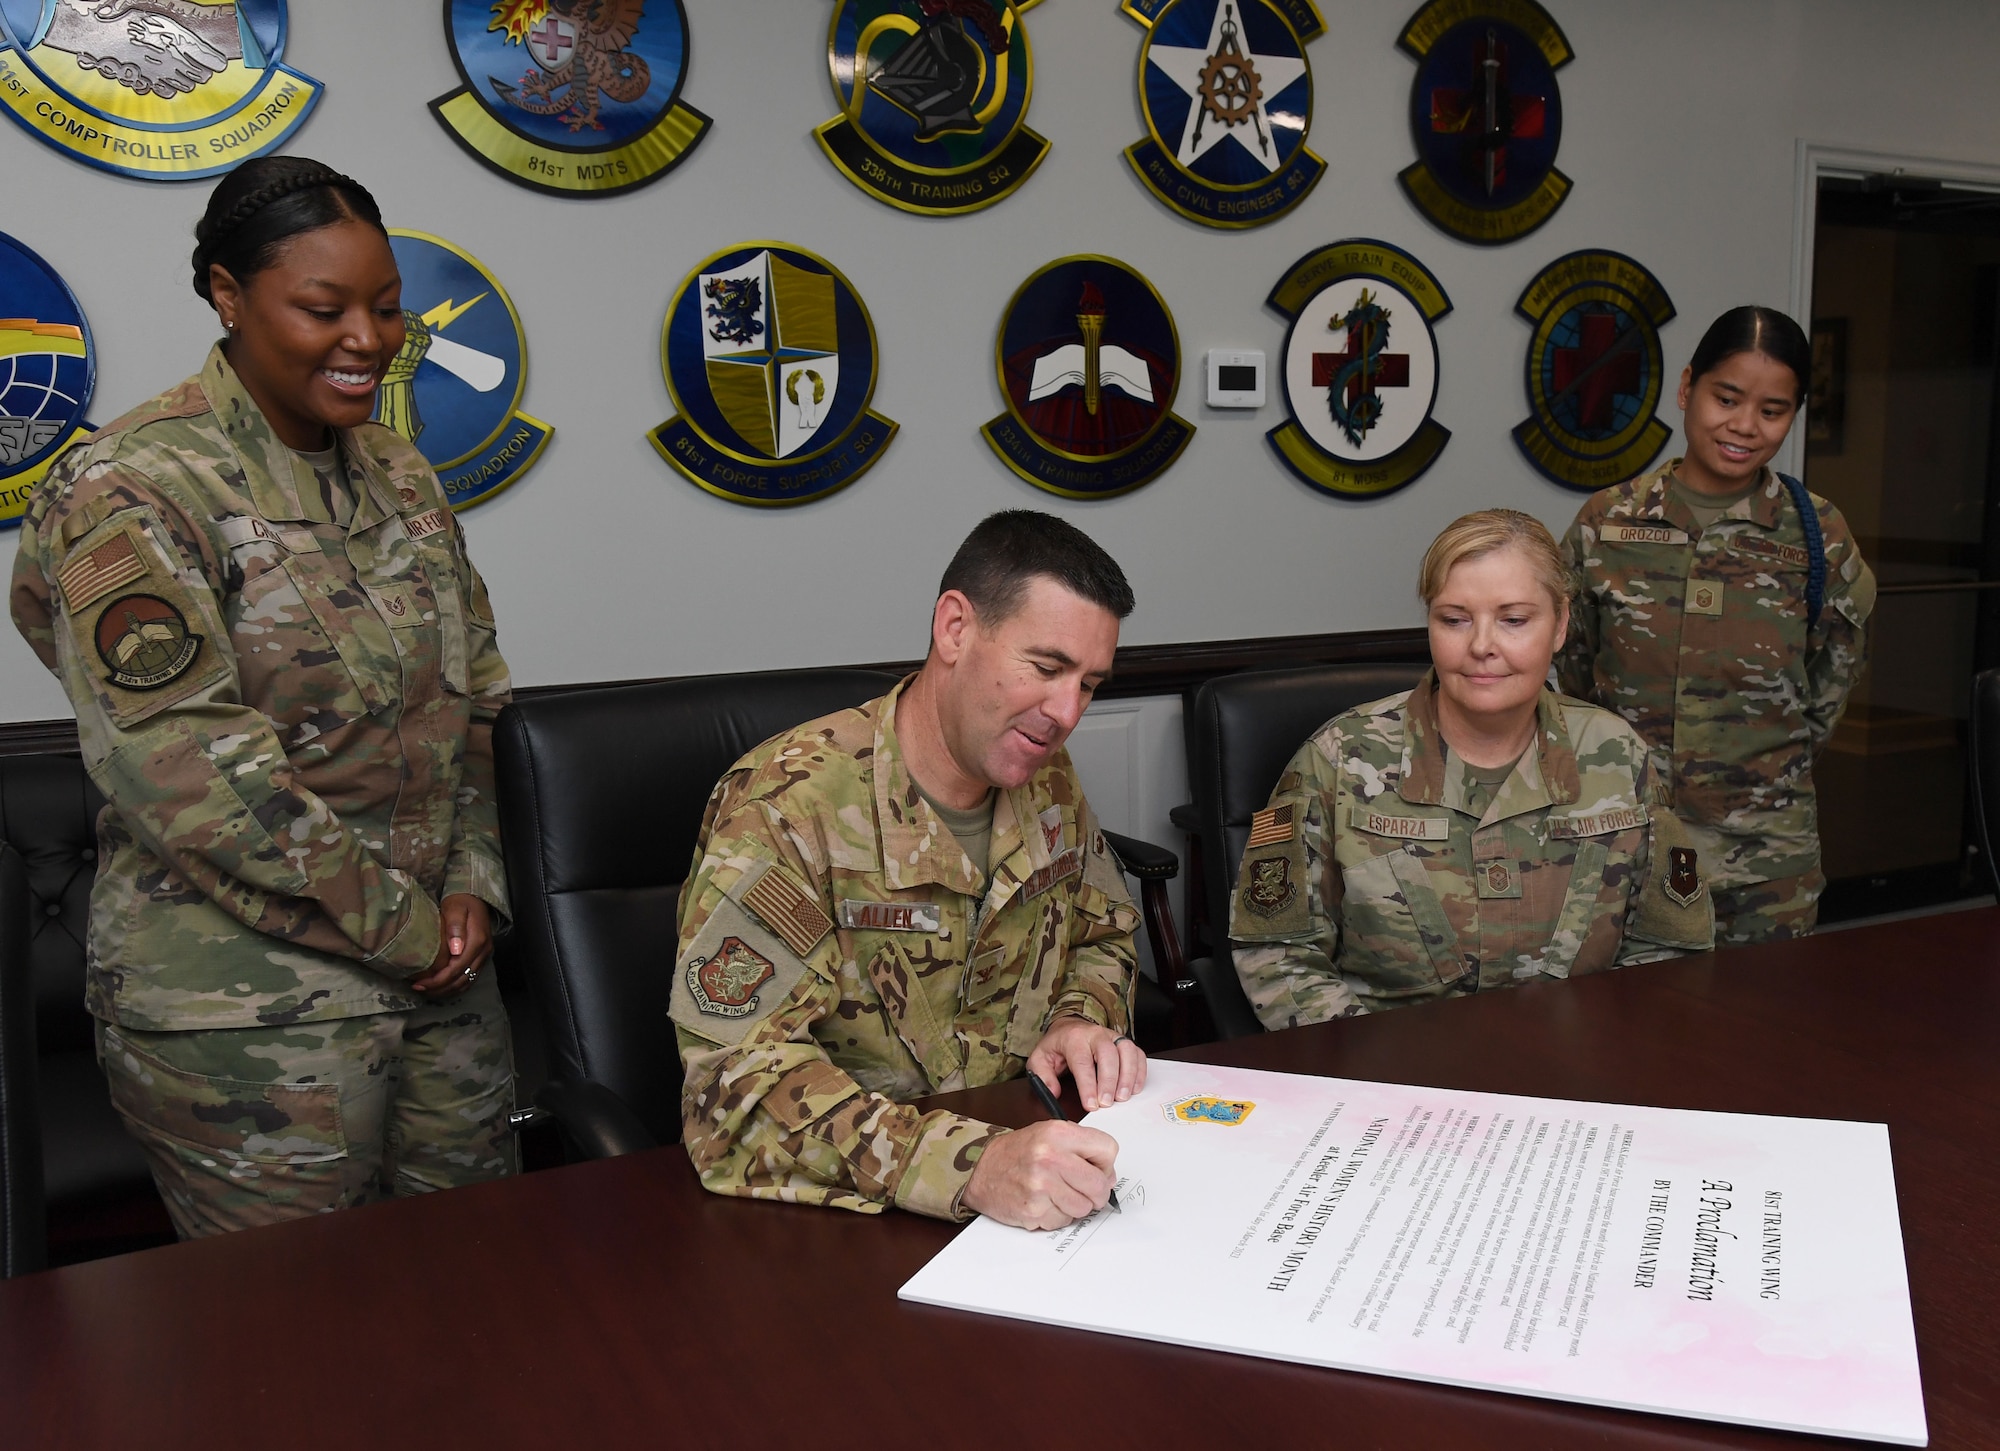 U.S. Air Force Col. Jason Allen, 81st Training Wing commander, signs the National Women's History Month Proclamation inside the 81st Training Wing headquarters building at Keesler Air Force Base, Mississippi, March 1, 2023.